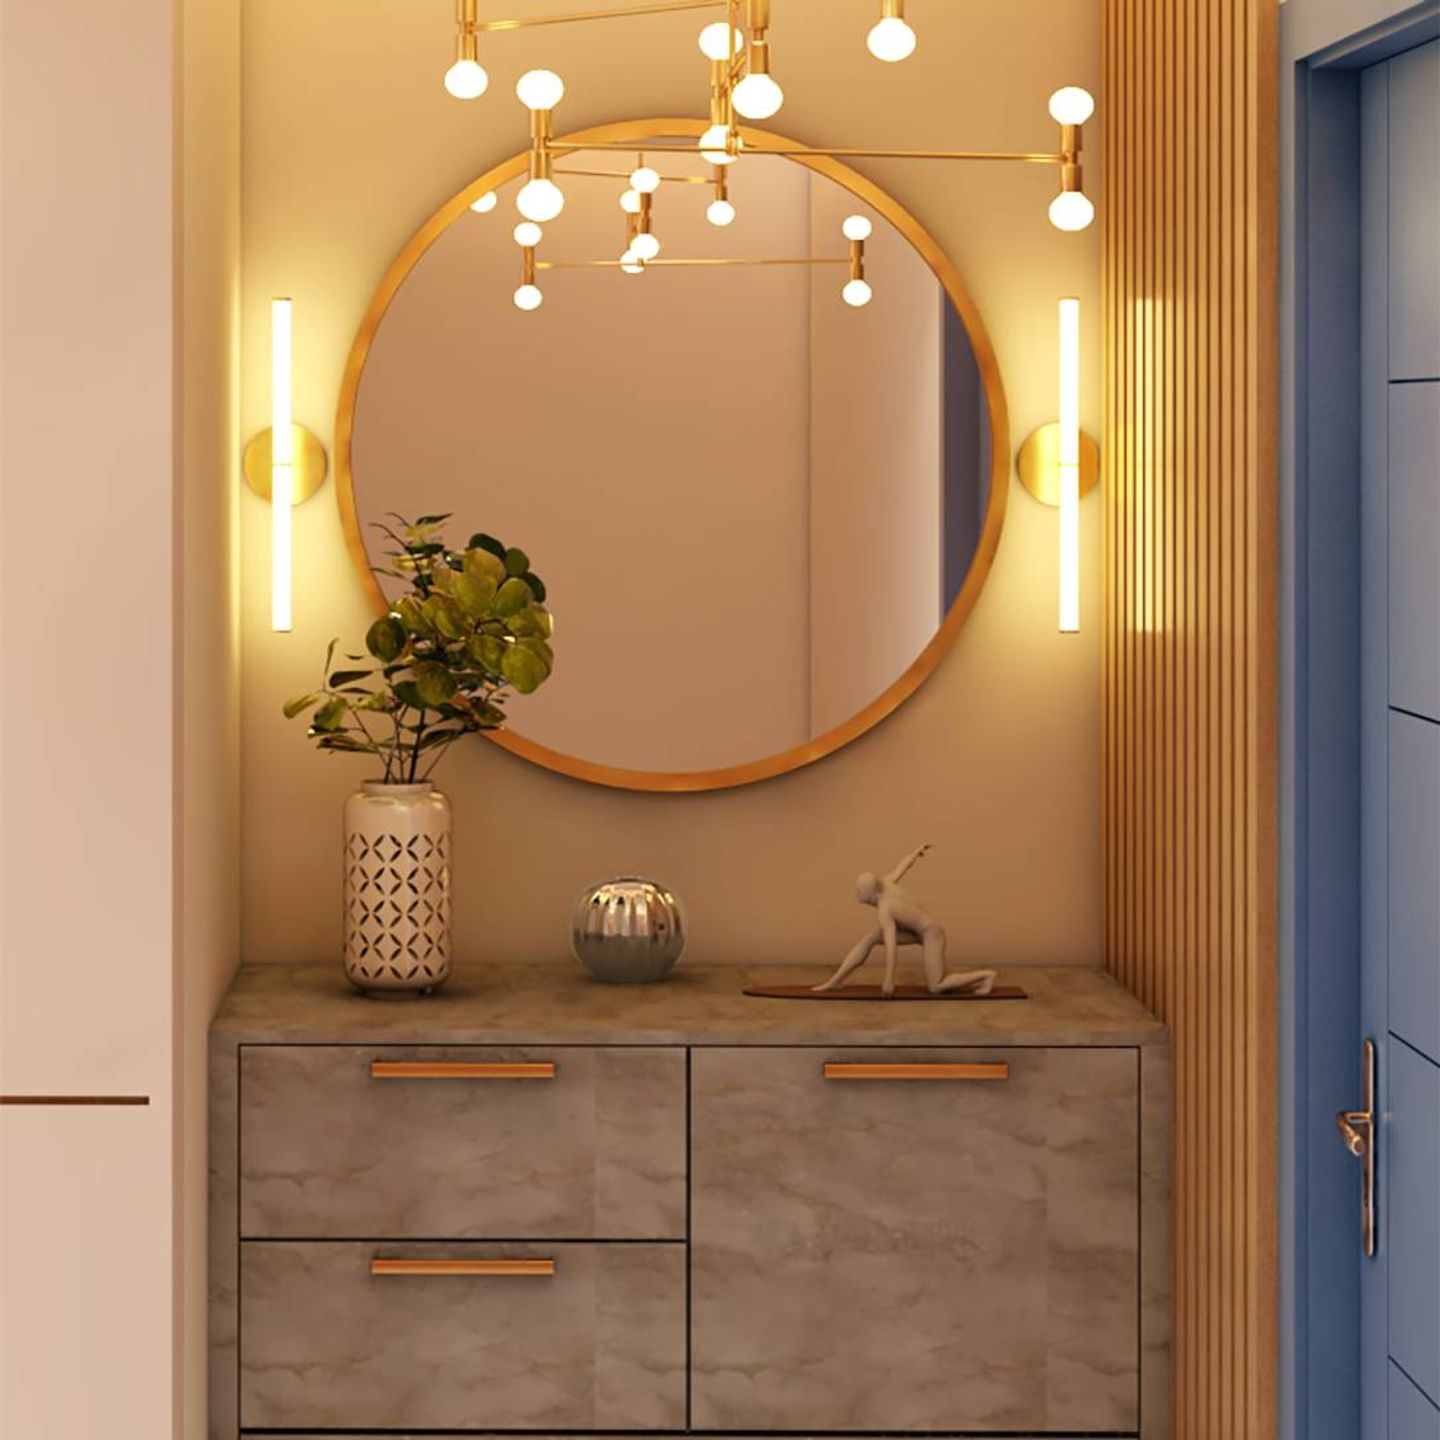 Compact Foyer With Round Mirror, Warm Lights, And Closed Storage - Livspace